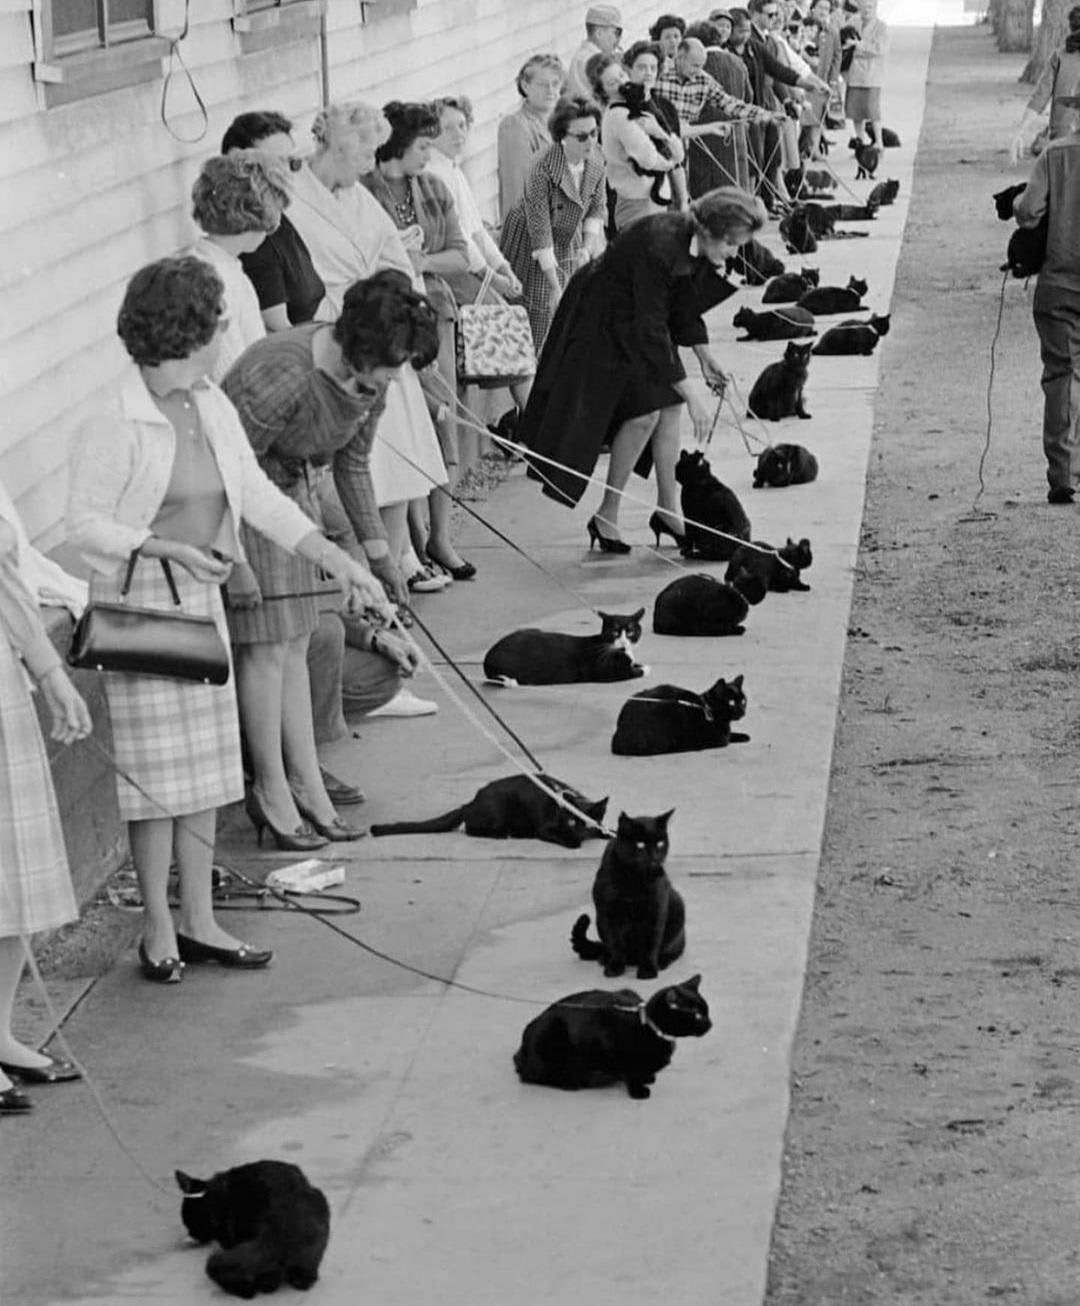 "Black Cat Auditions Photographed for Time Magazine in 1961" ‍⬛